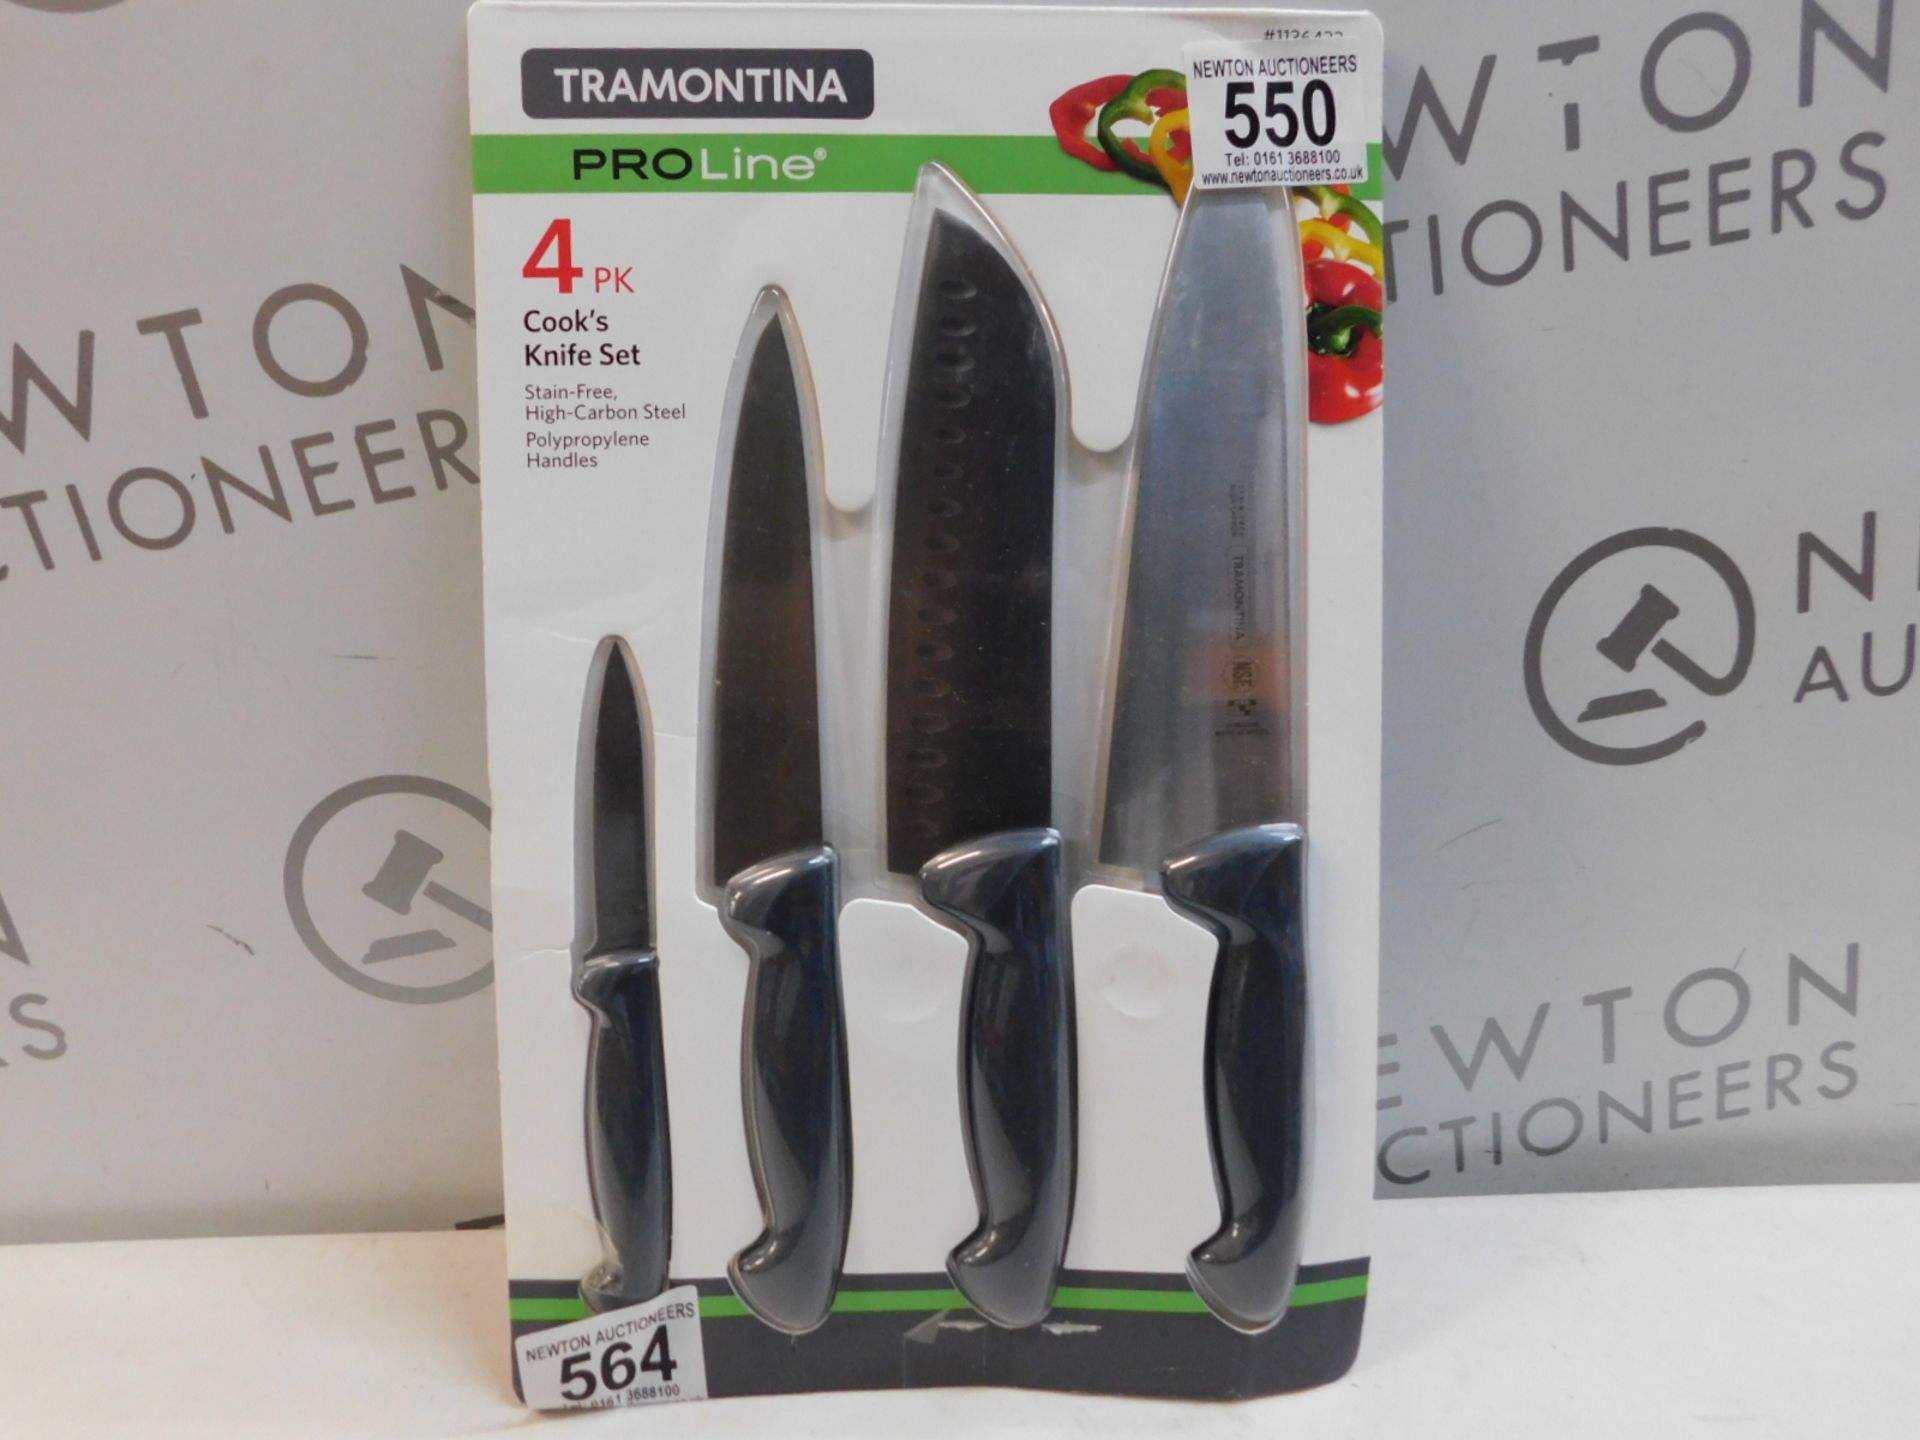 1 BOXED TRAMONTINA 4PK CARBON-STEEL COOK'S KNIFE SET RRP Â£49.99